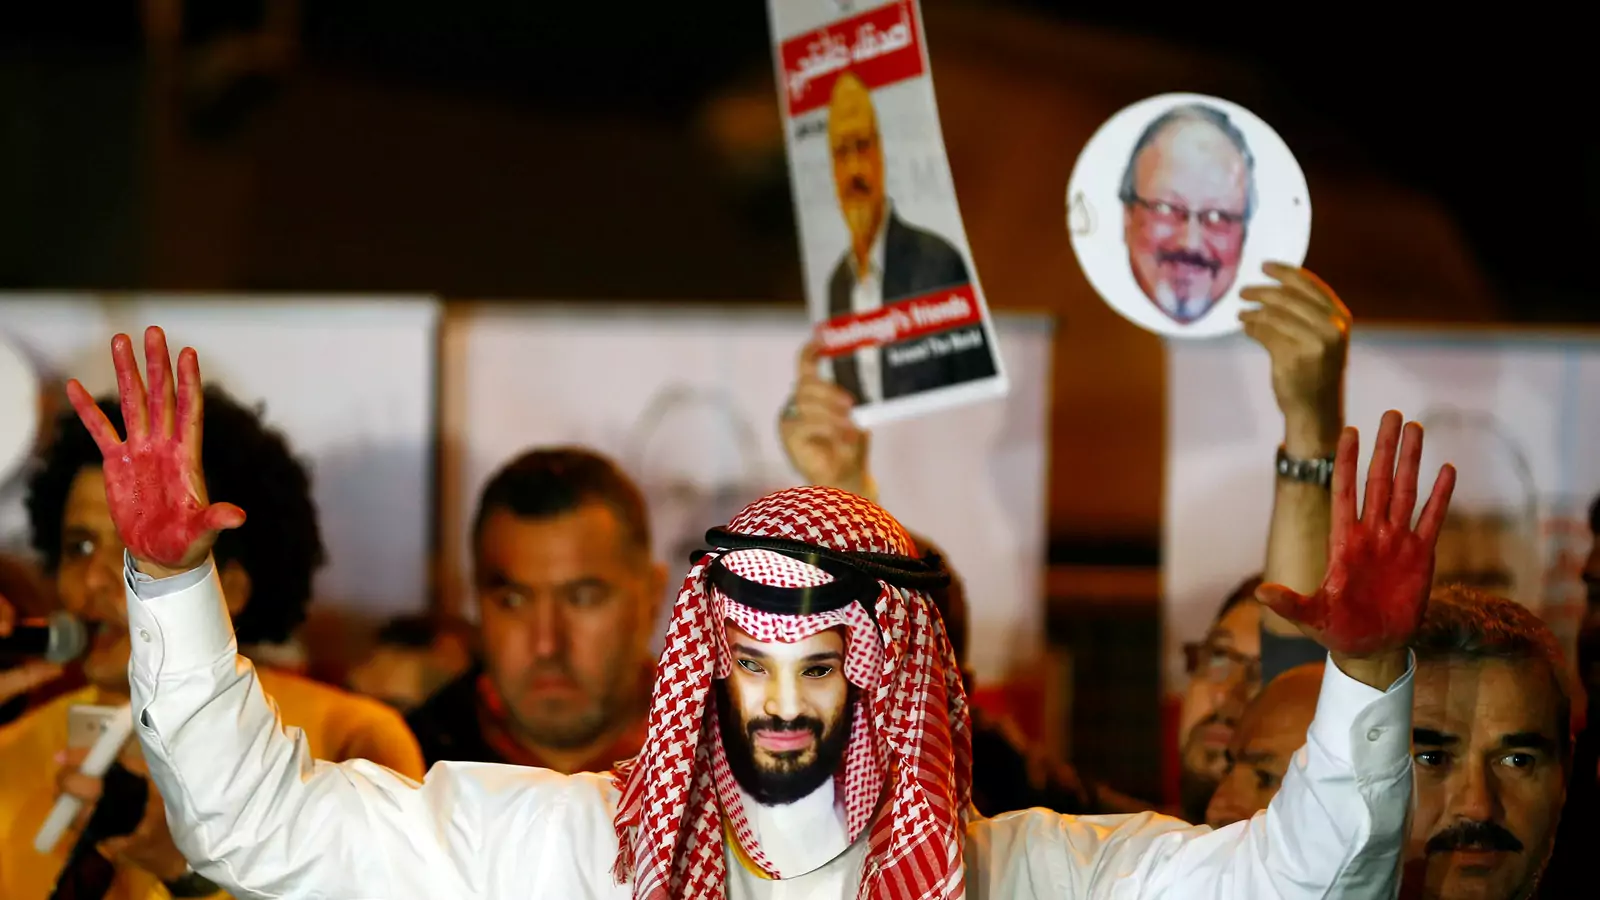 A demonstrator wearing a mask of Saudi Crown Prince Mohammed bin Salman attends a protest outside the Saudi Arabia consulate in Istanbul, Turkey October 25, 2018.